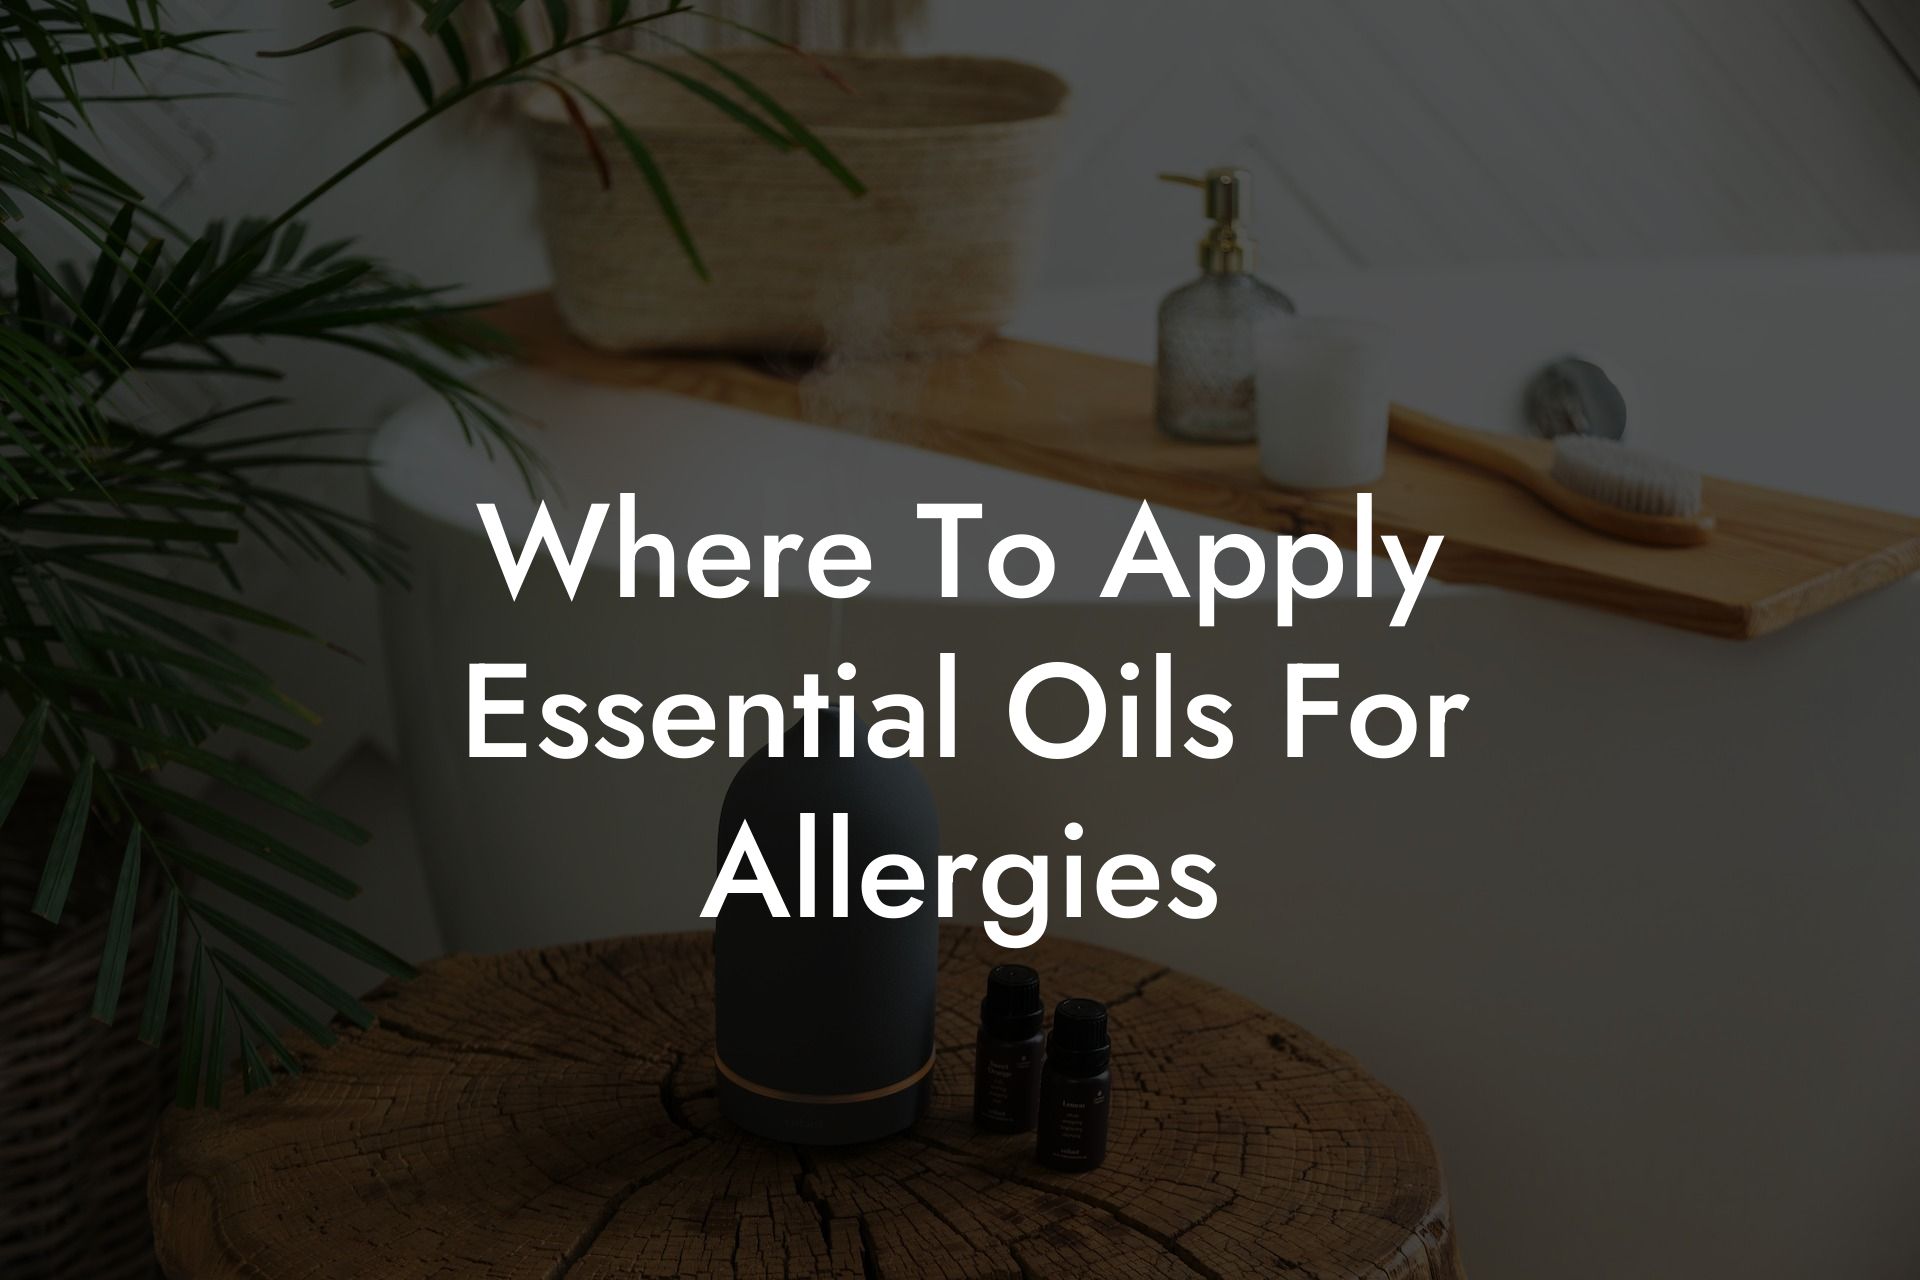 Where To Apply Essential Oils For Allergies